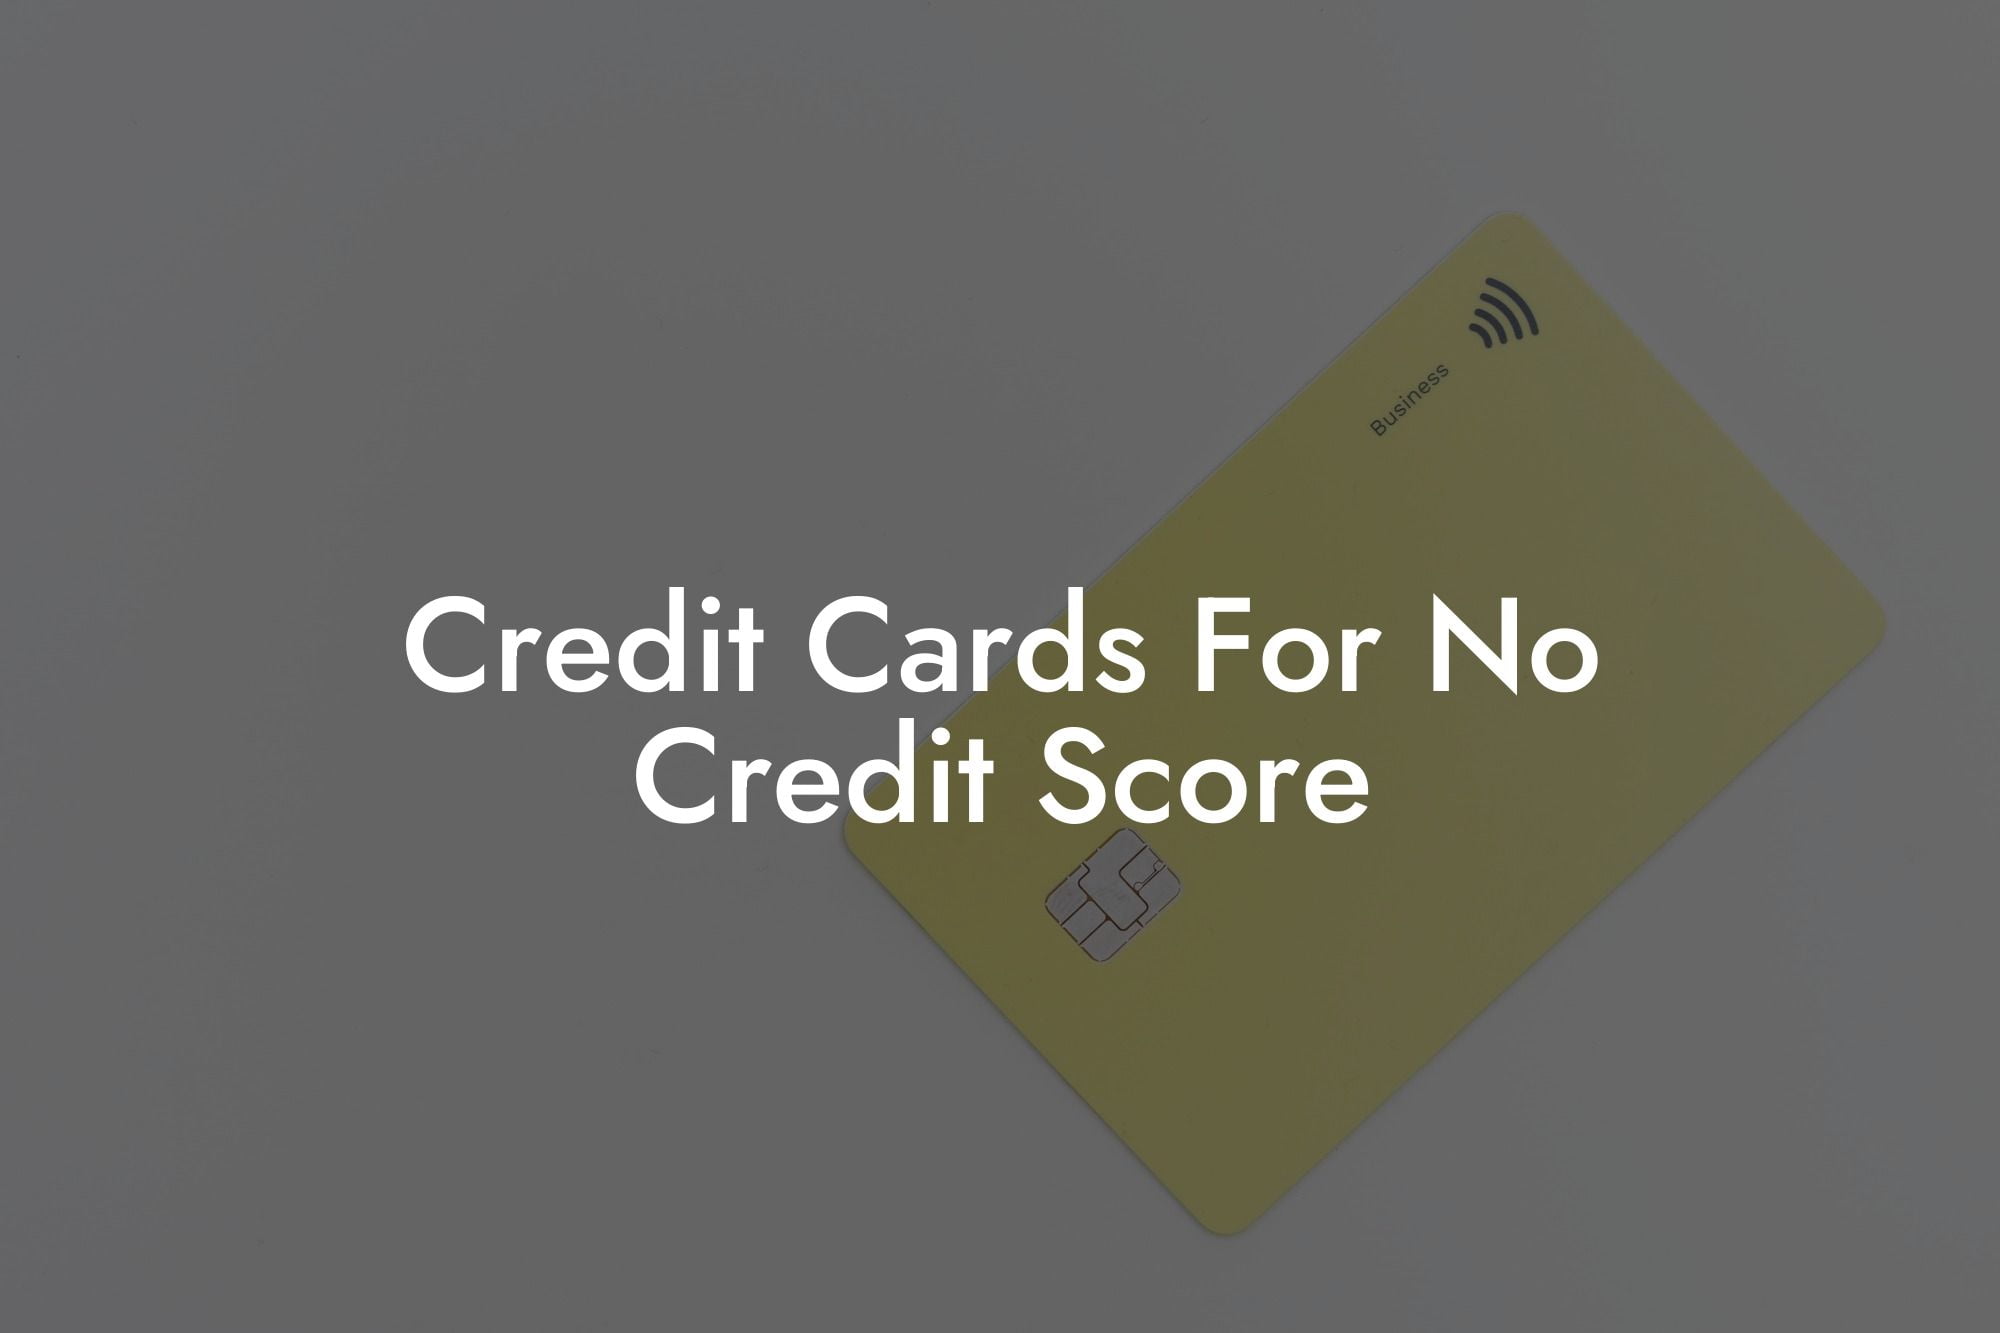 Credit Cards For No Credit Score